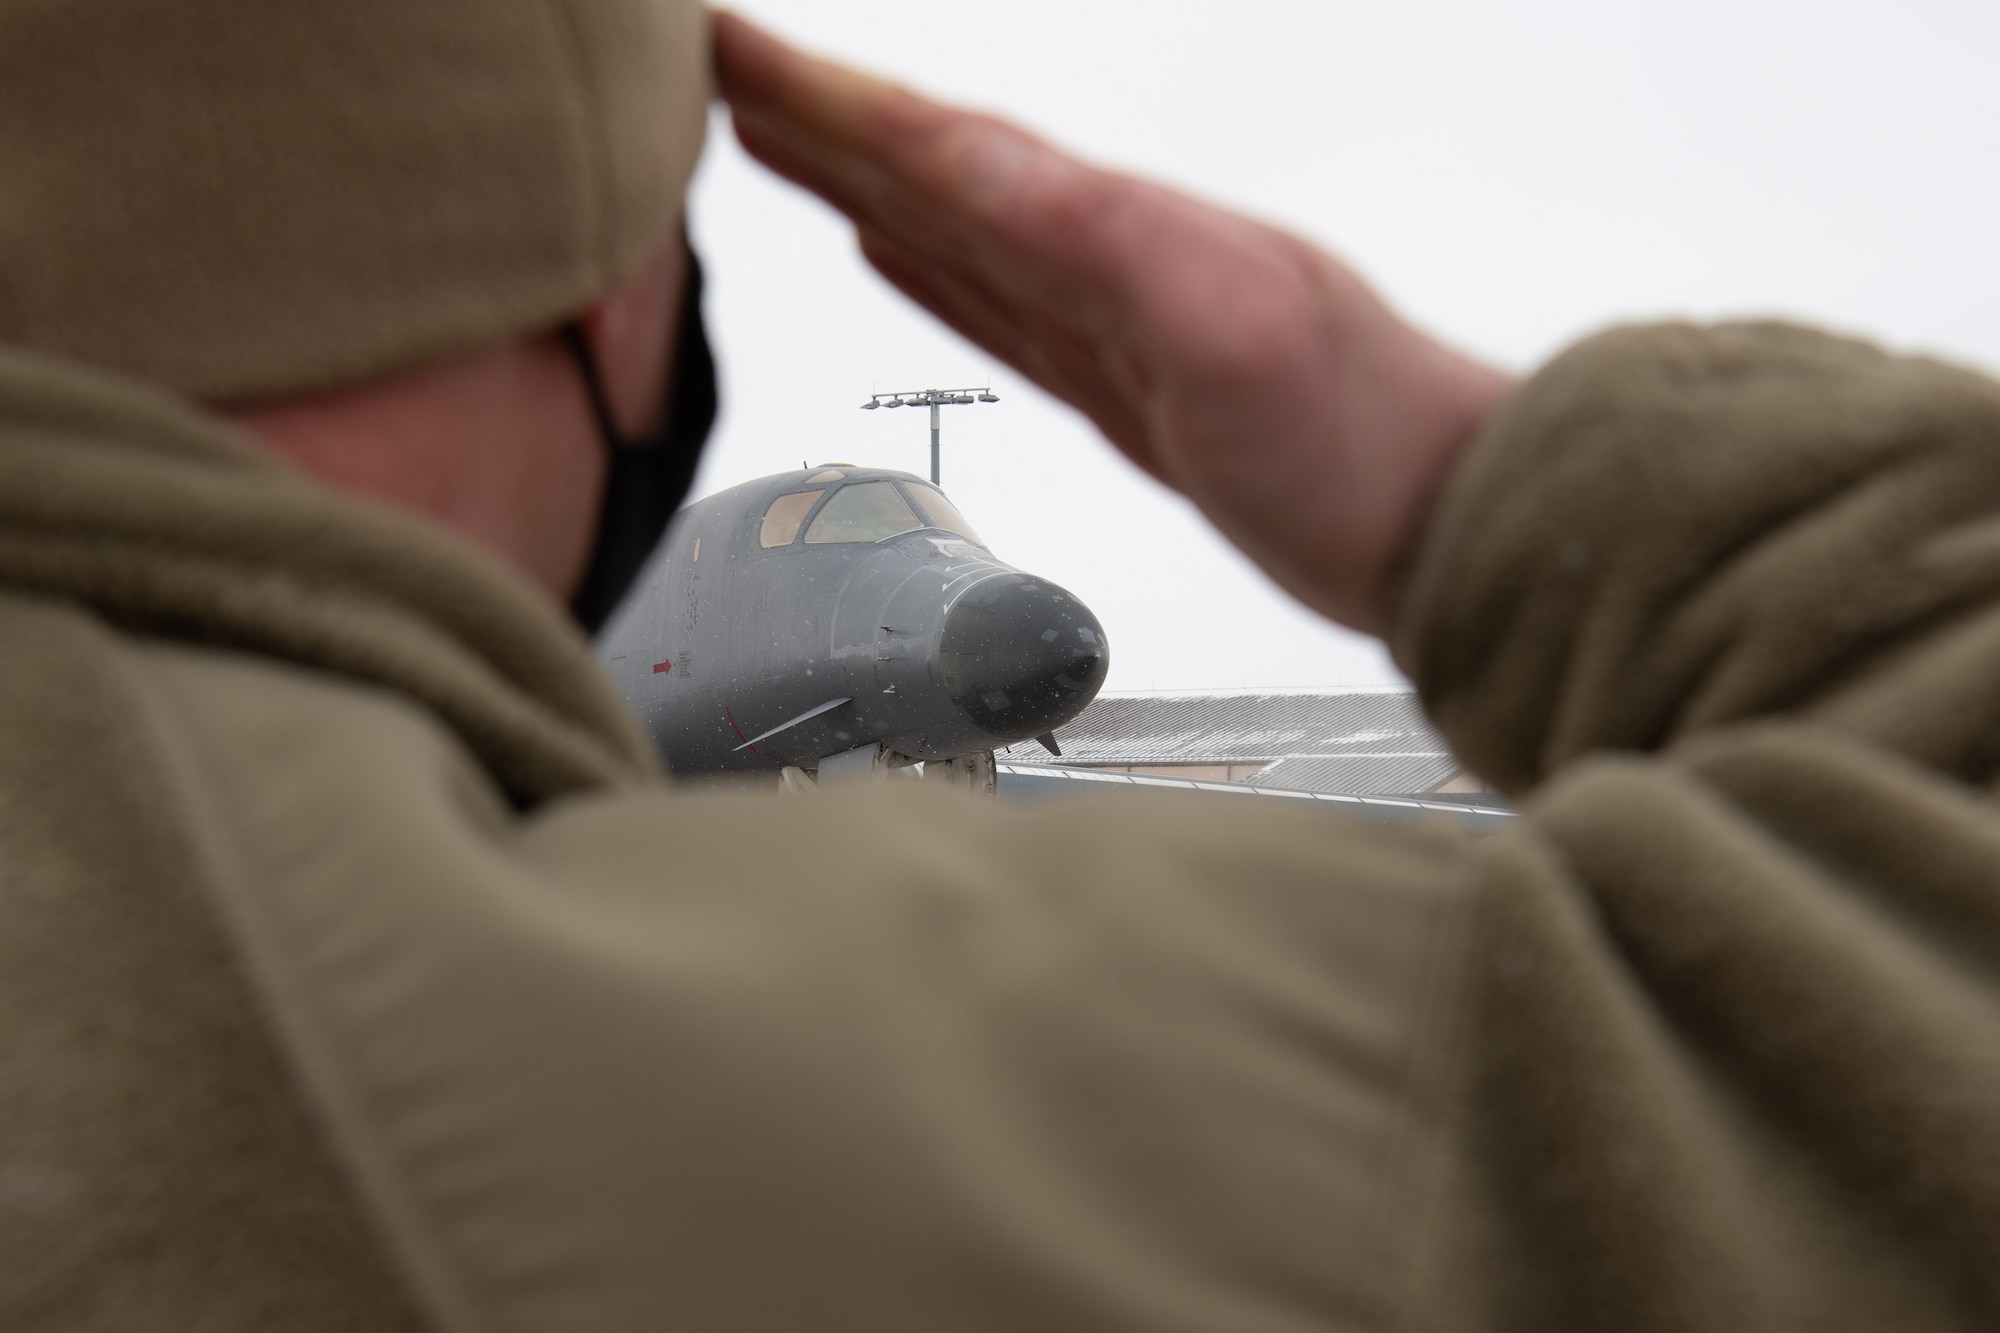 Master Sgt. David Jackson, the 28th Aircraft Maintenance Squadron production superintendent, renders a farewell salute a B-1B Lancer being divested prior to its final departure from Ellsworth Air Force Base, S.D., Feb. 17, 2021. This limited aircraft divestiture will contribute to funding investments in key capabilities for the future bomber force and allow B-1B maintainers to focus their efforts on the healthiest B-1s that remain in the fleet.  (U.S.  Air Force photo by Airman Jonah Fronk)